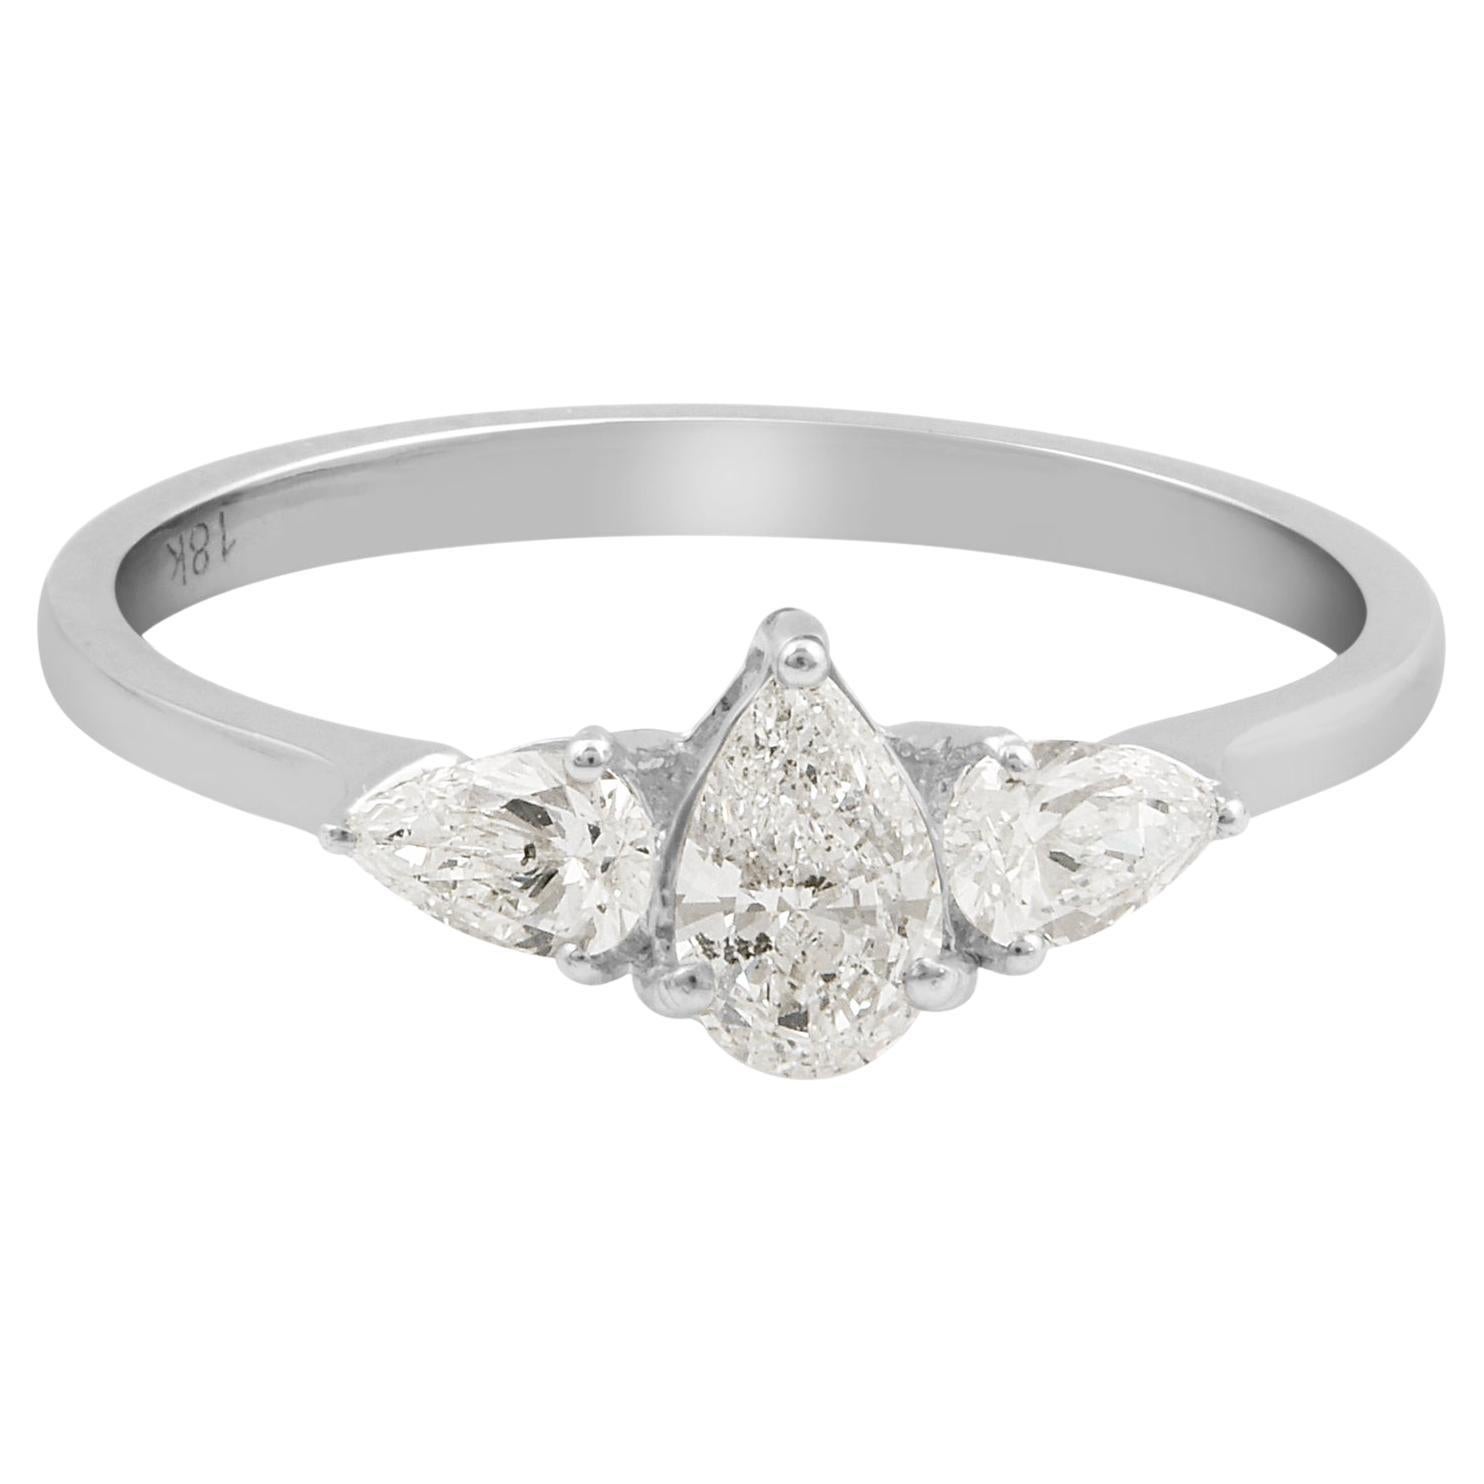 Real 0.53 Carat SI Clarity HI Color Solitaire Pear Diamond Ring 18k White Gold